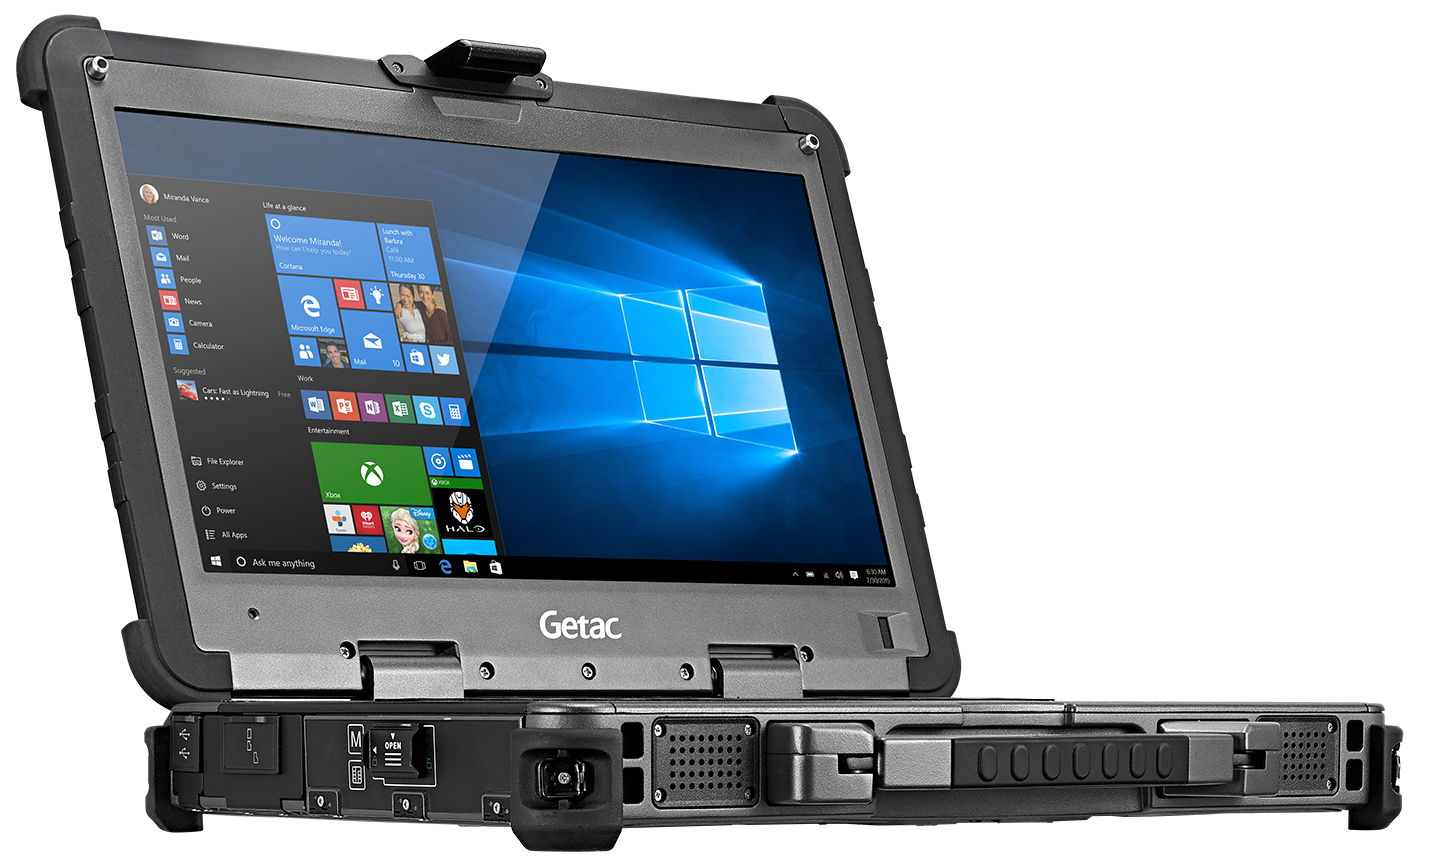 Side view of the Getax X500 rugged laptop